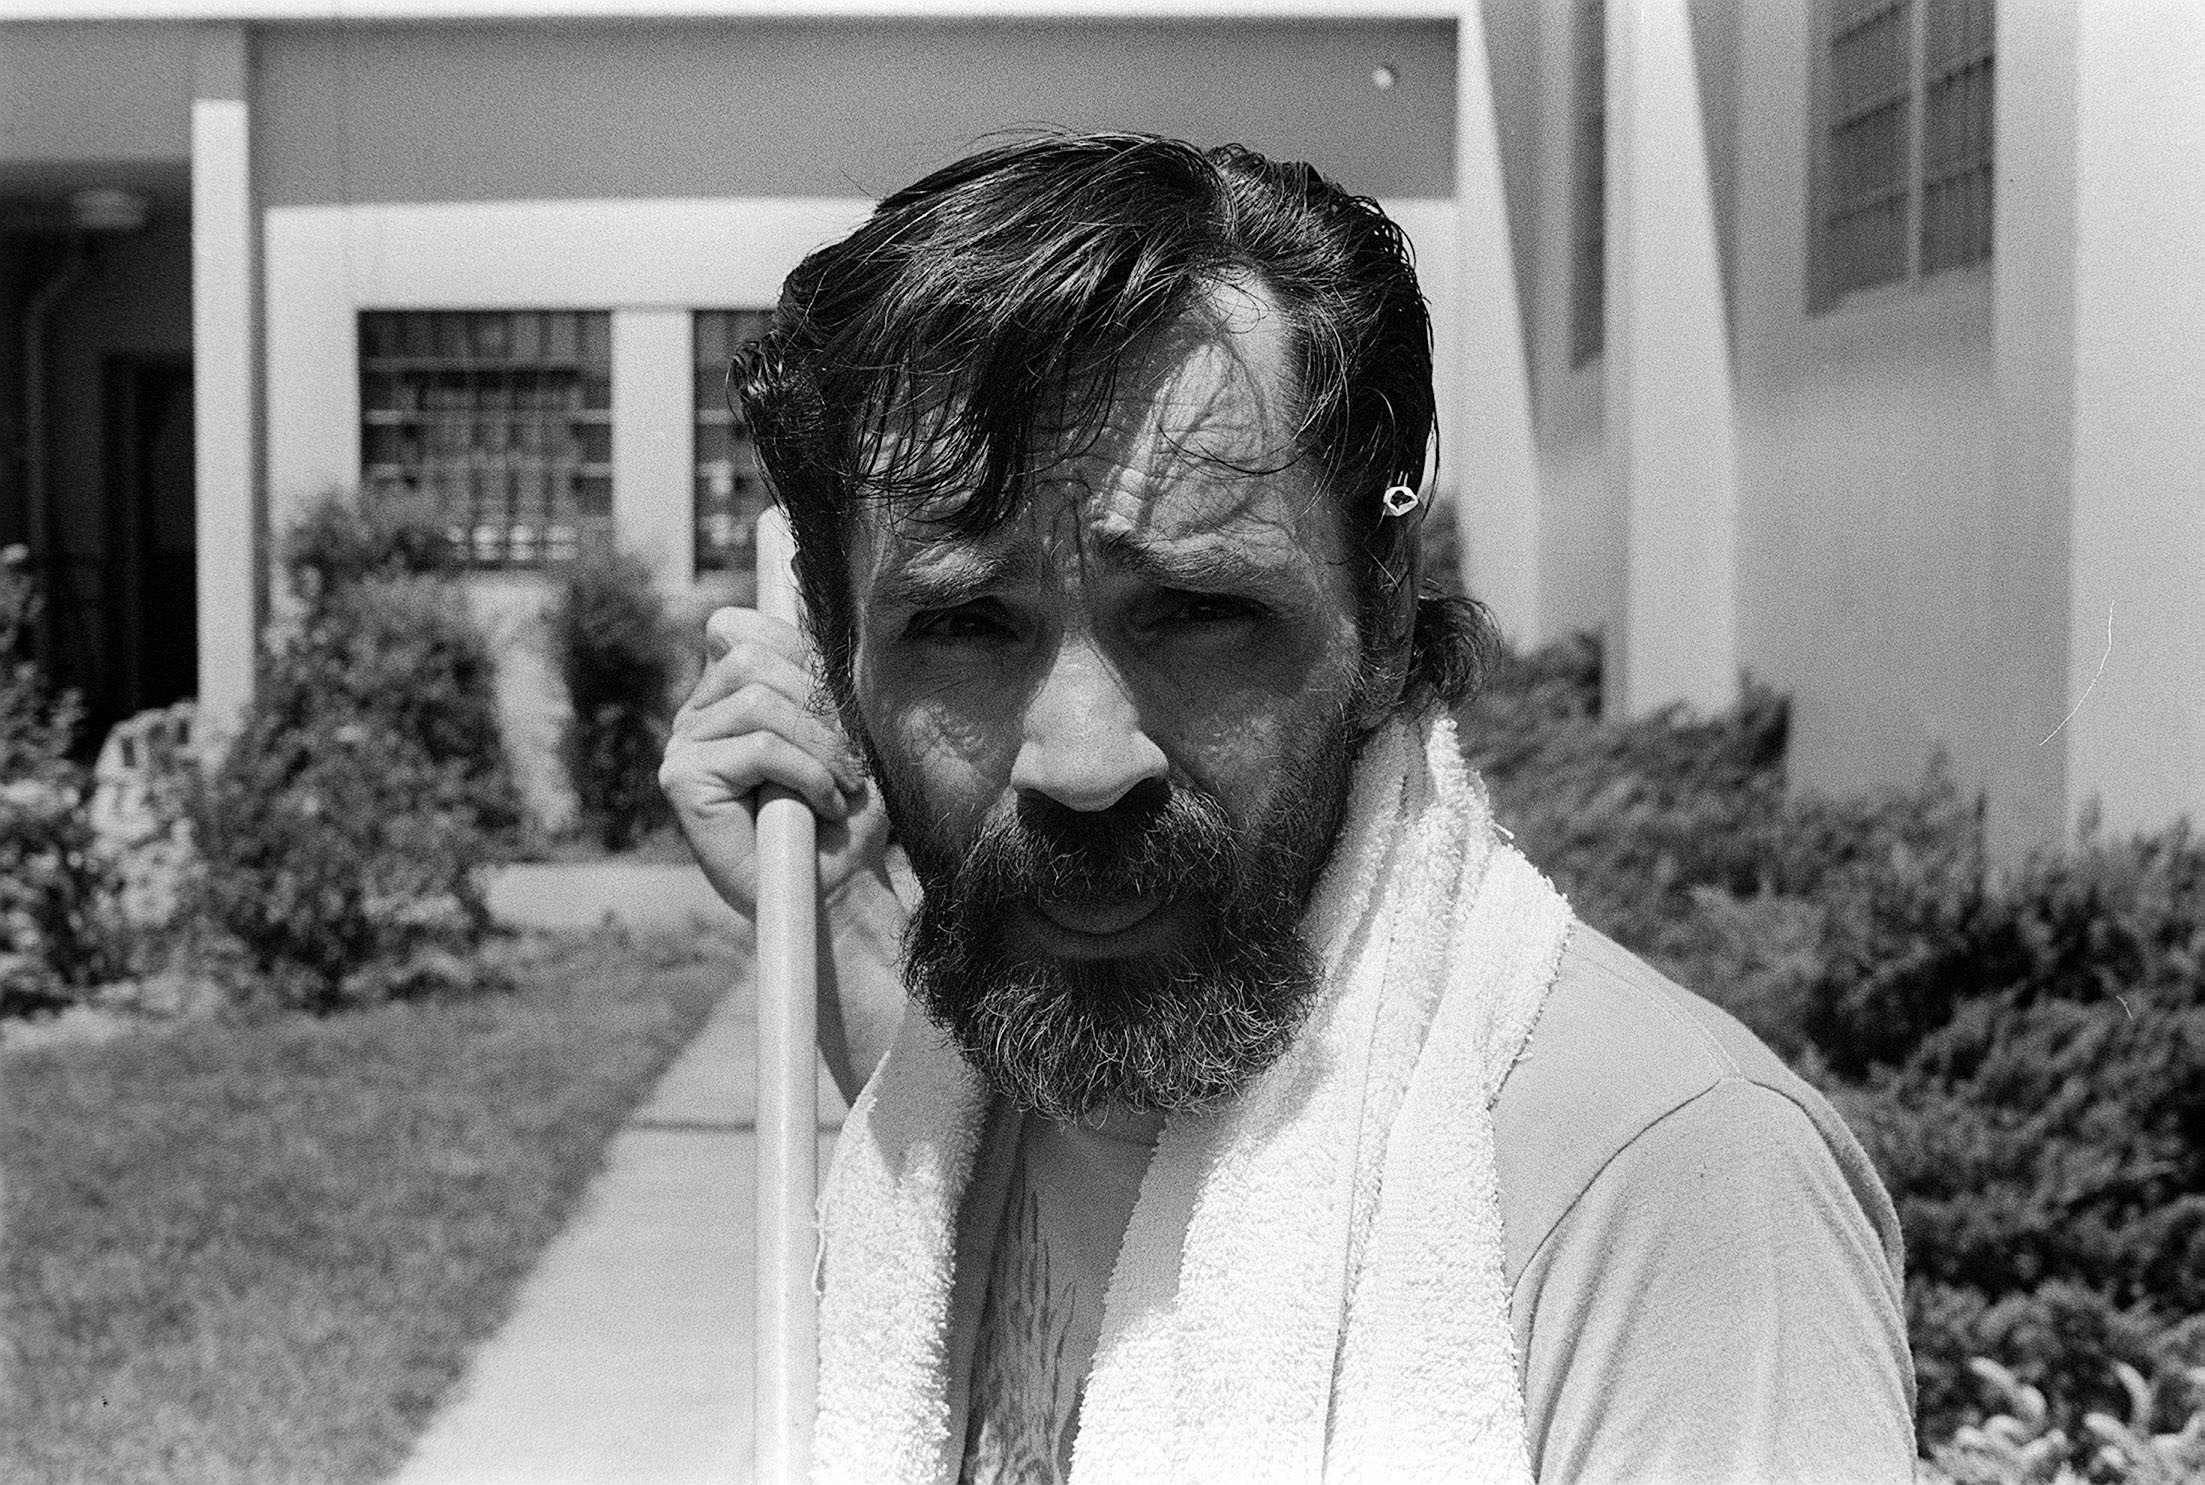 Charles Manson in front of a building